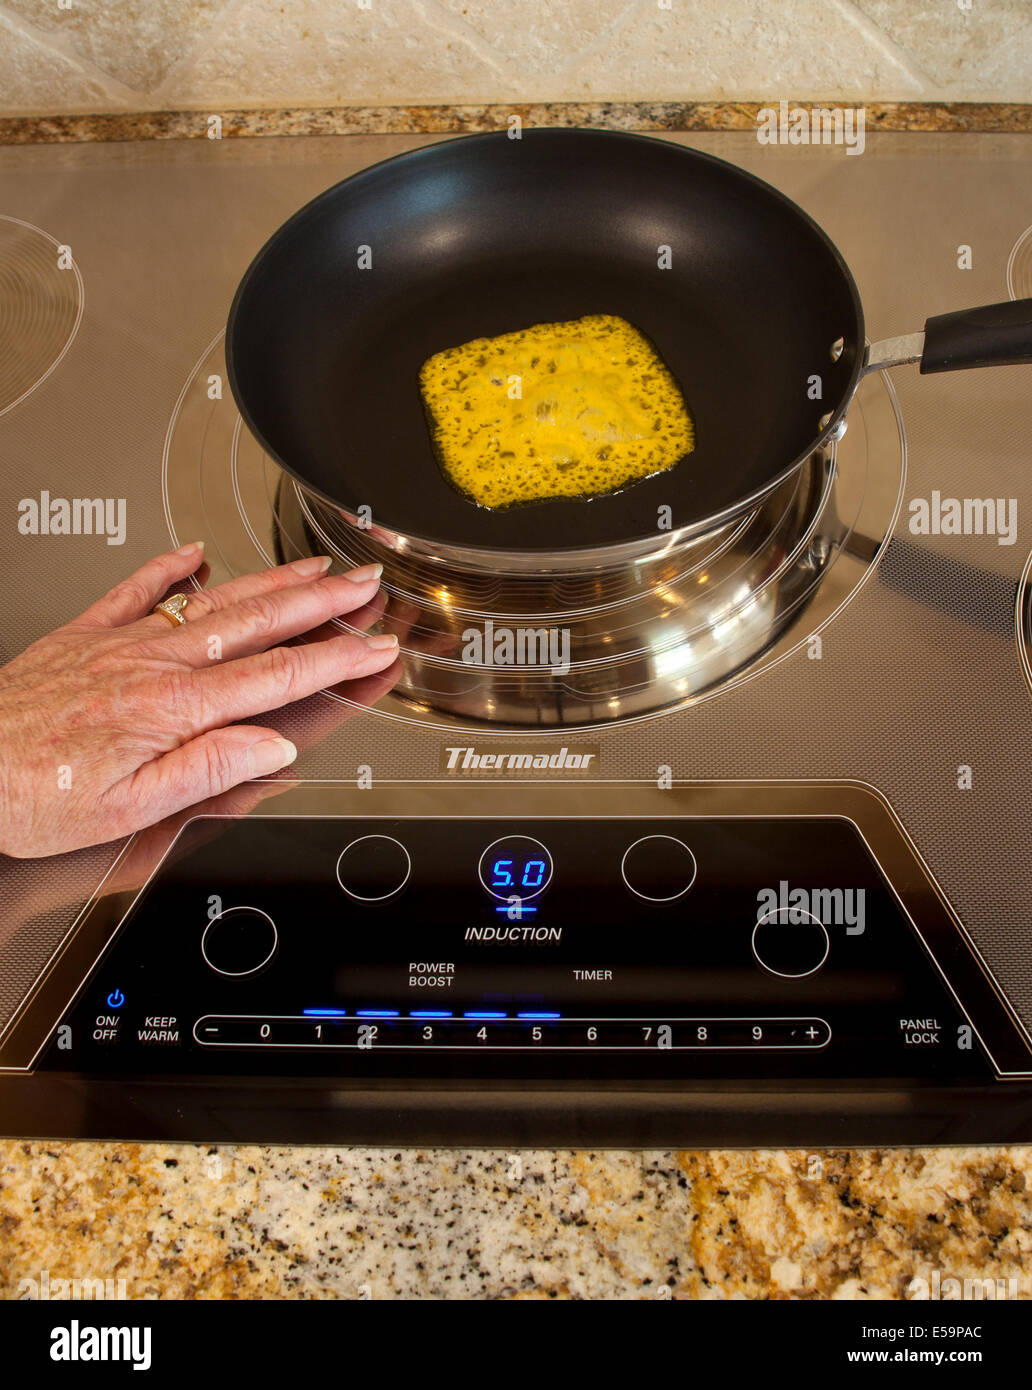 Magnetic energy of touching touch energy saving Thermador Induction cooktop with melting cheese Series of 4 images.  MR  © Myrleen Pearson Stock Photo